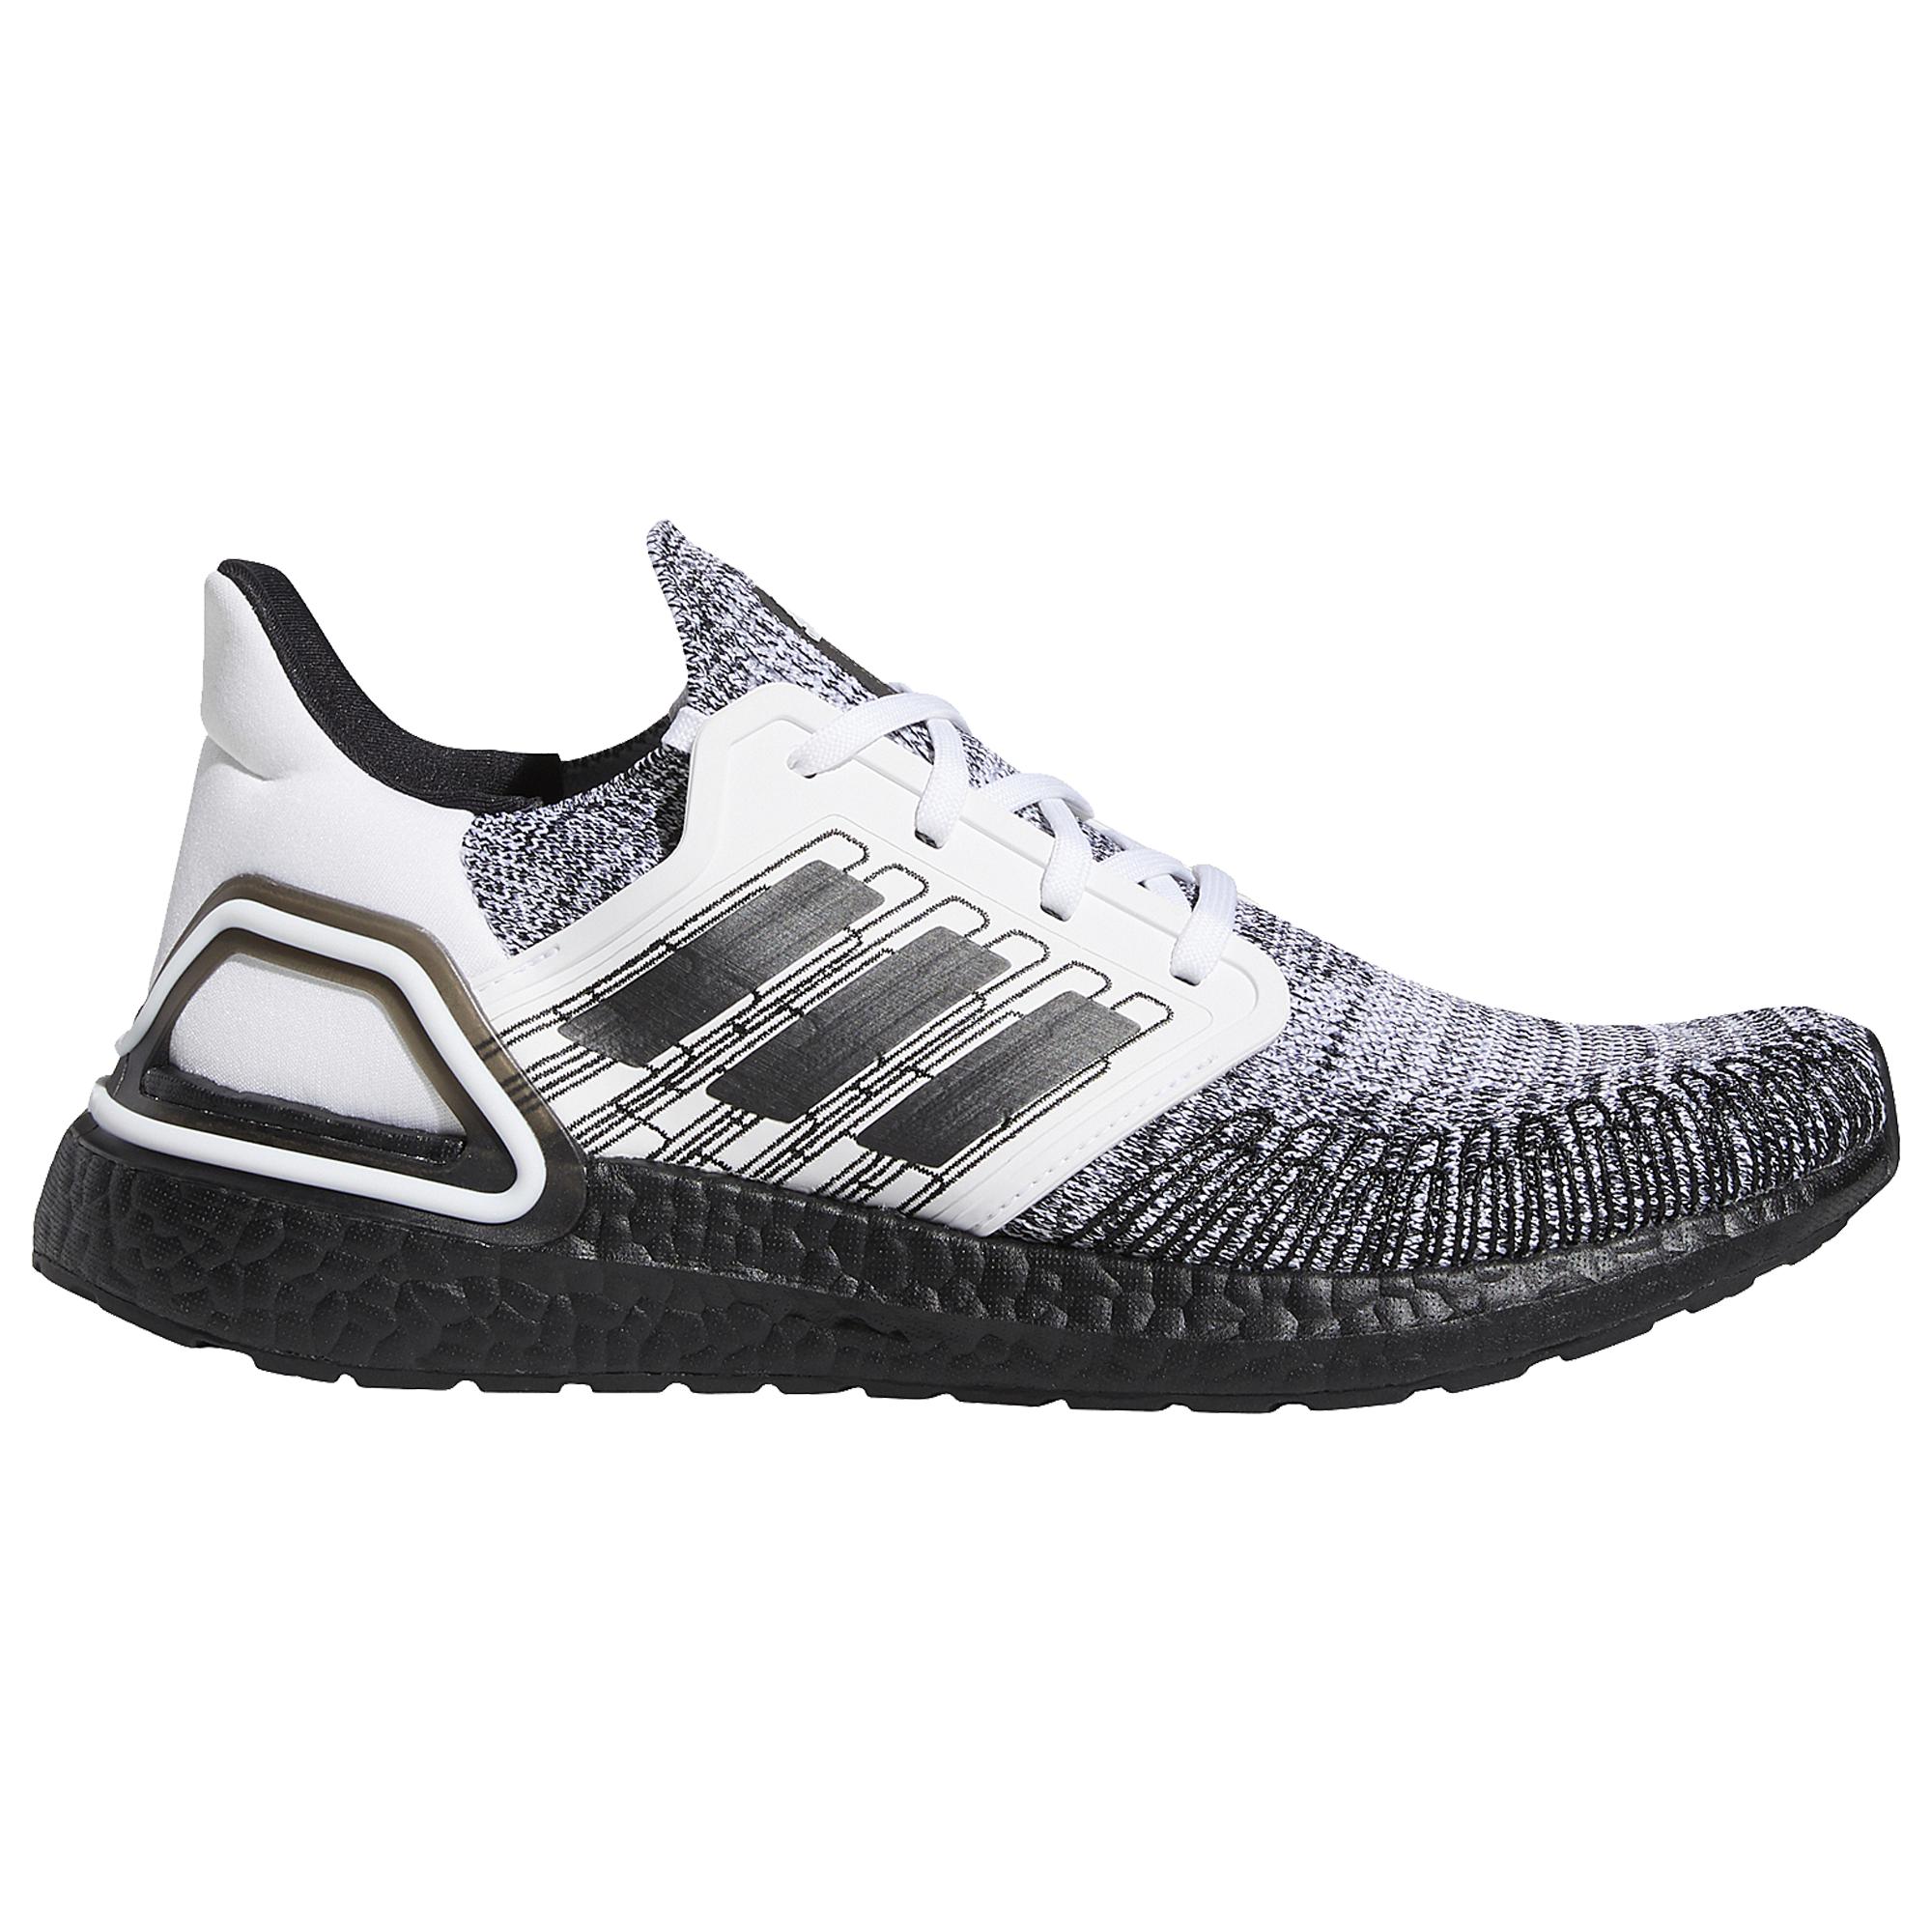 adidas Ultraboost 20 - Running Shoes in Black for Men - Lyst